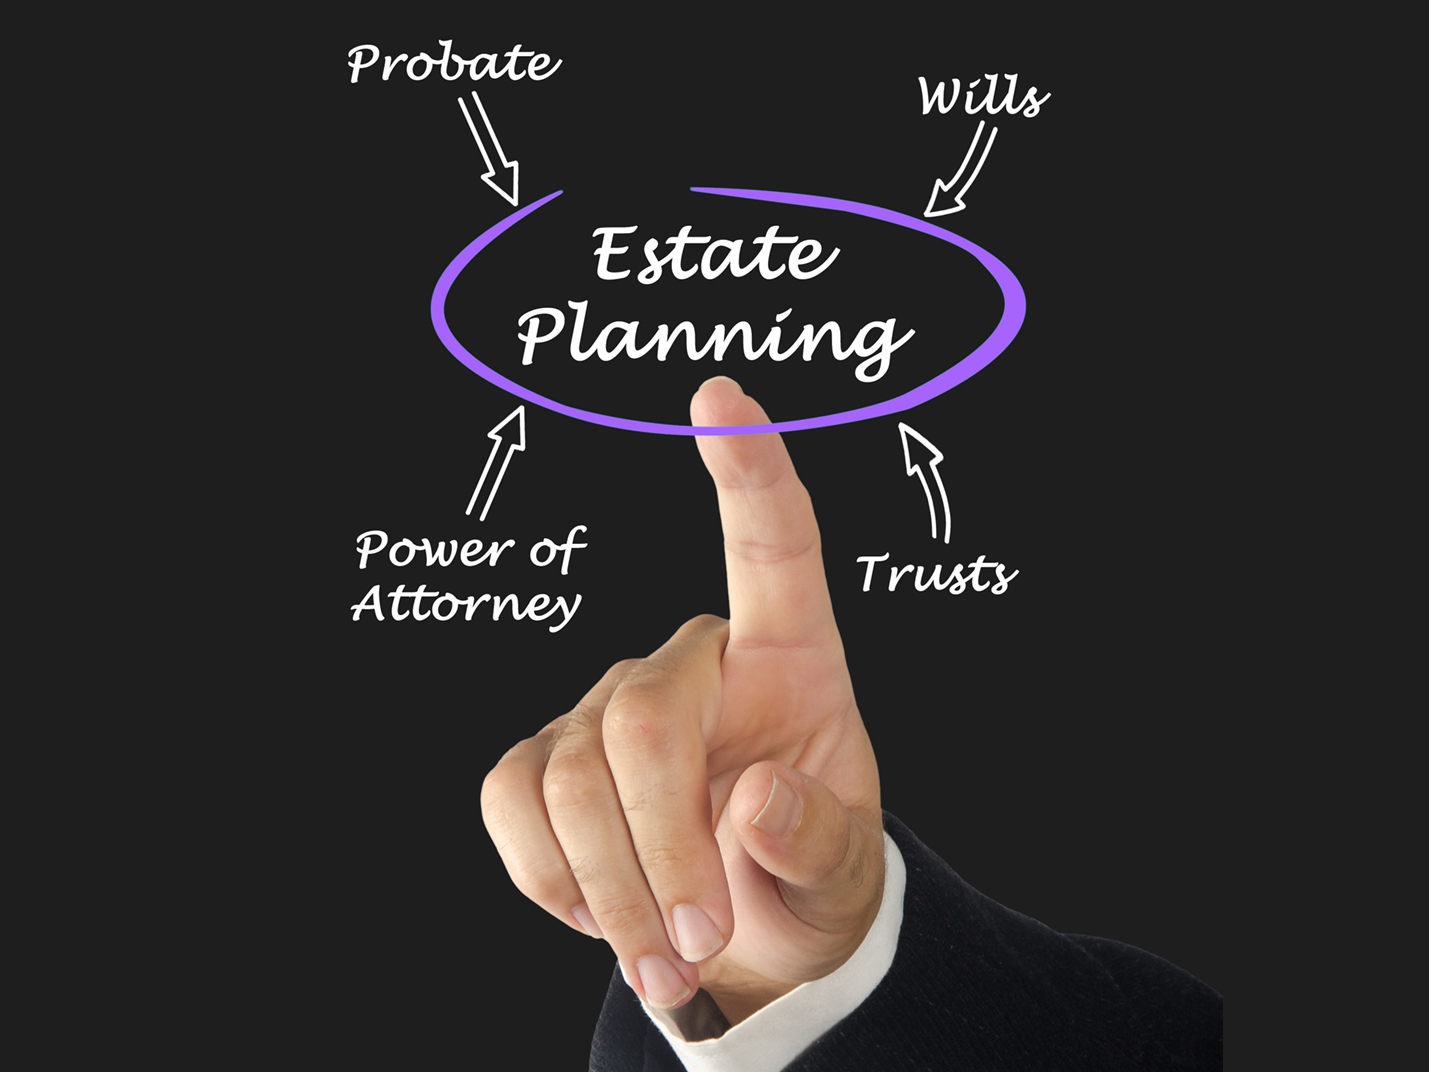 The attorneys at MLT are familiar with Trusts and would be happy to assist in determining the best path forward for your estate planning needs.